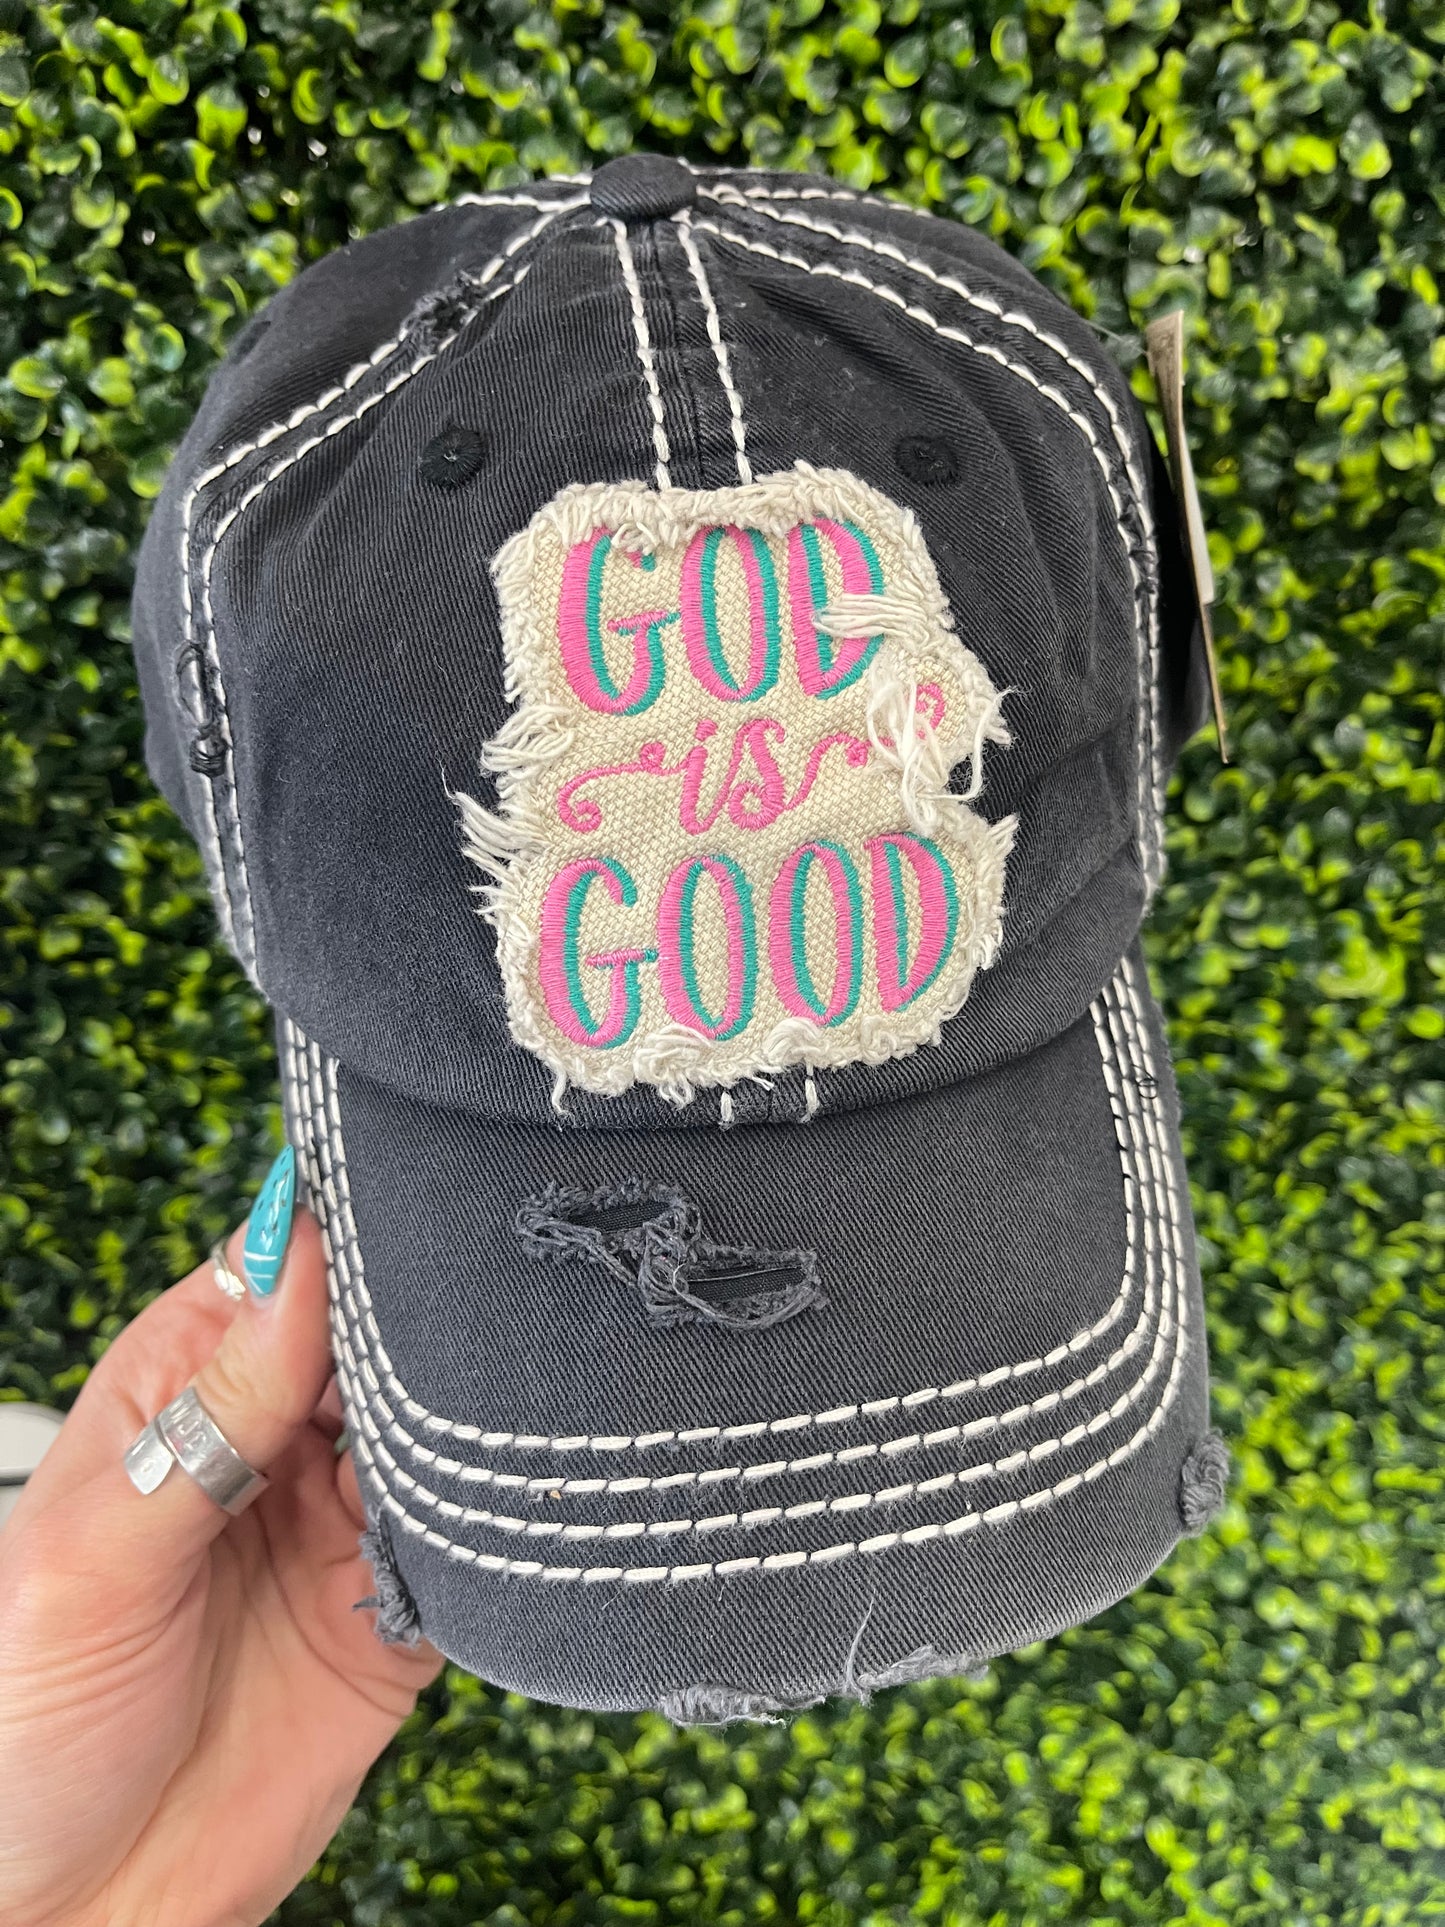 God Is Good Distressed Patch Hat - Black